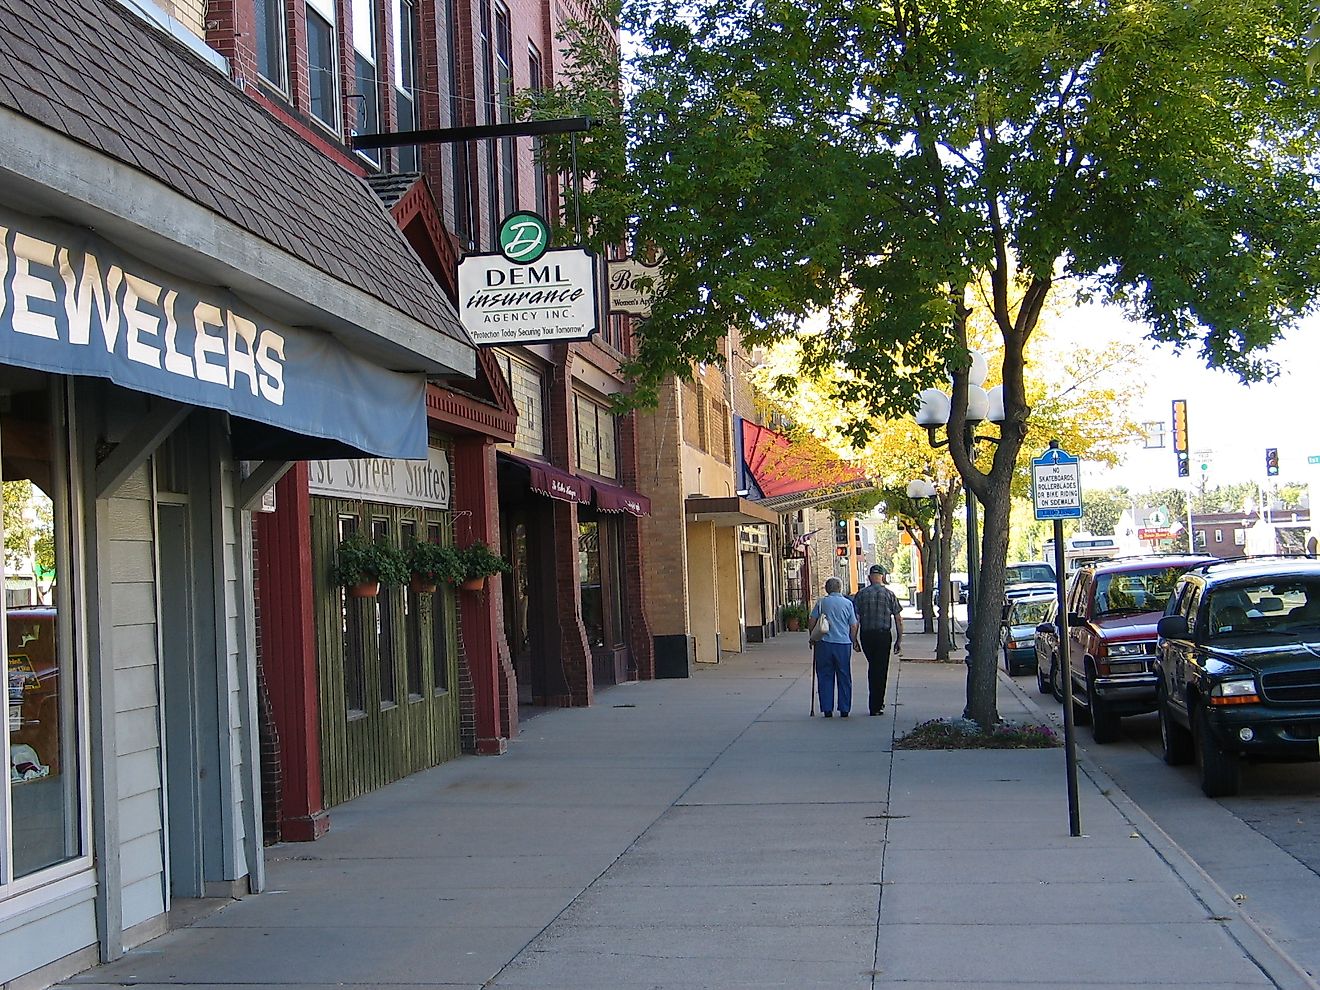 A street in Little Falls, Minnesota, By Dustin Simmonds, CC BY 3.0, https://commons.wikimedia.org/w/index.php?curid=34309052